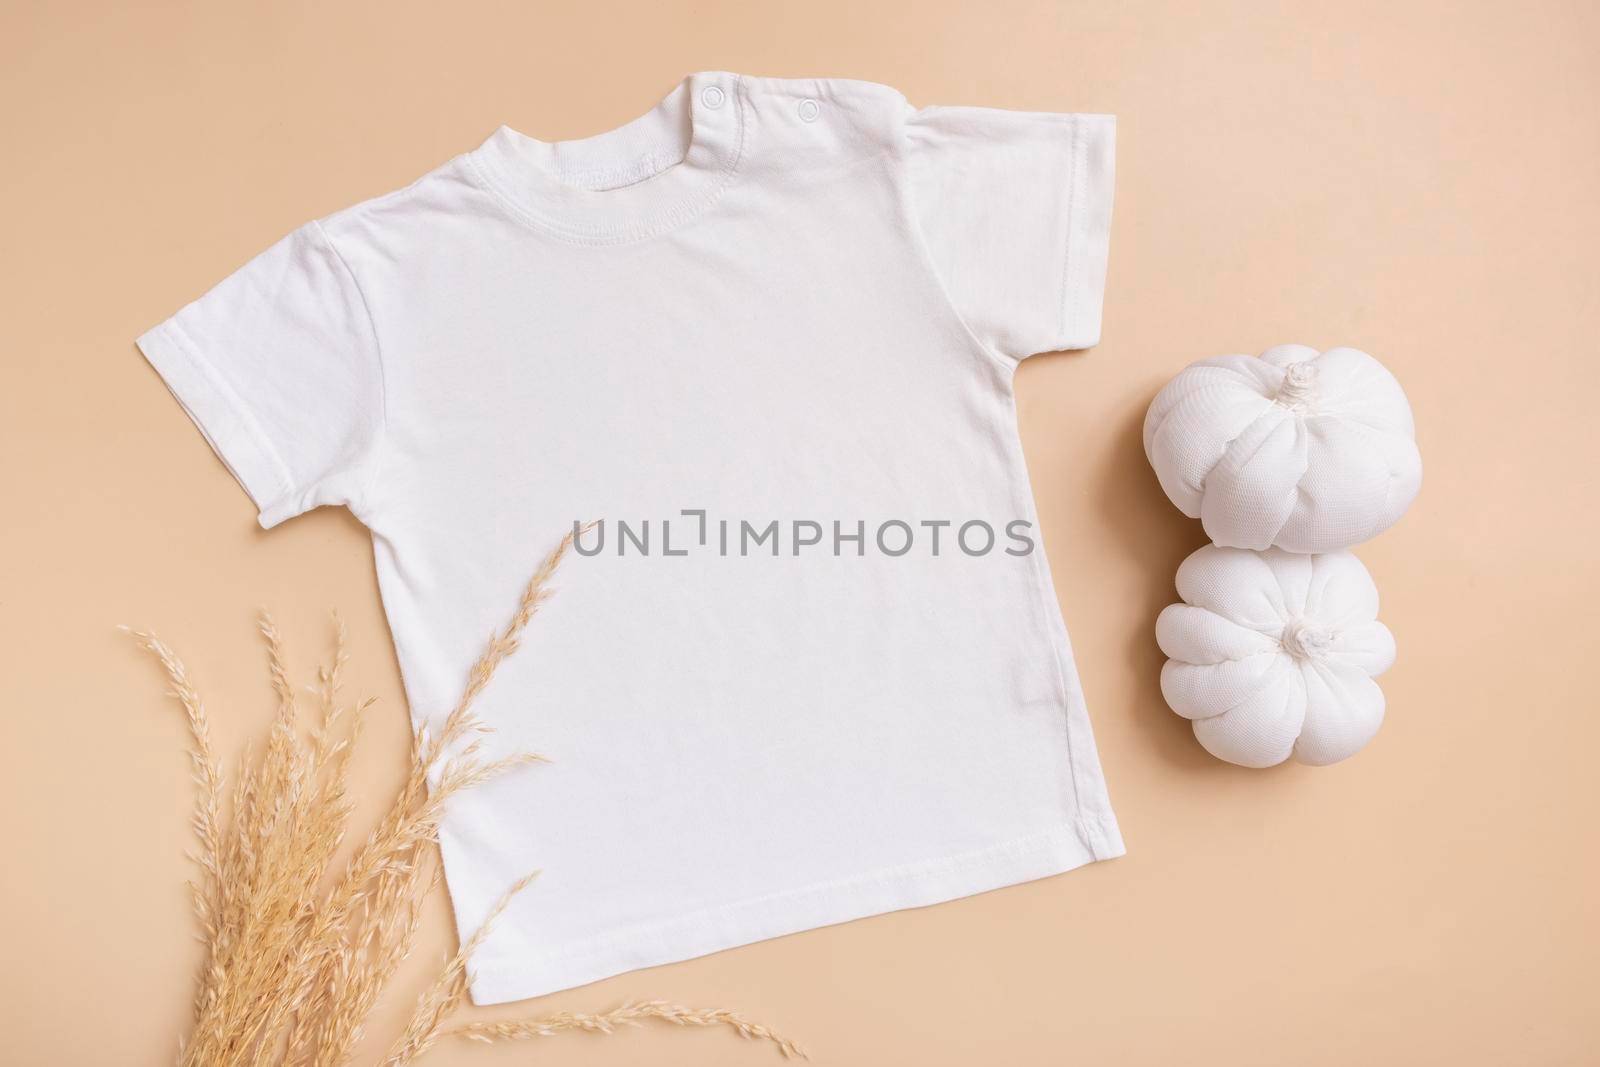 White baby t-shirt top view. Mock-up for logo, text or design on beige background. Flat lay child clothes with decorative pumpkins.